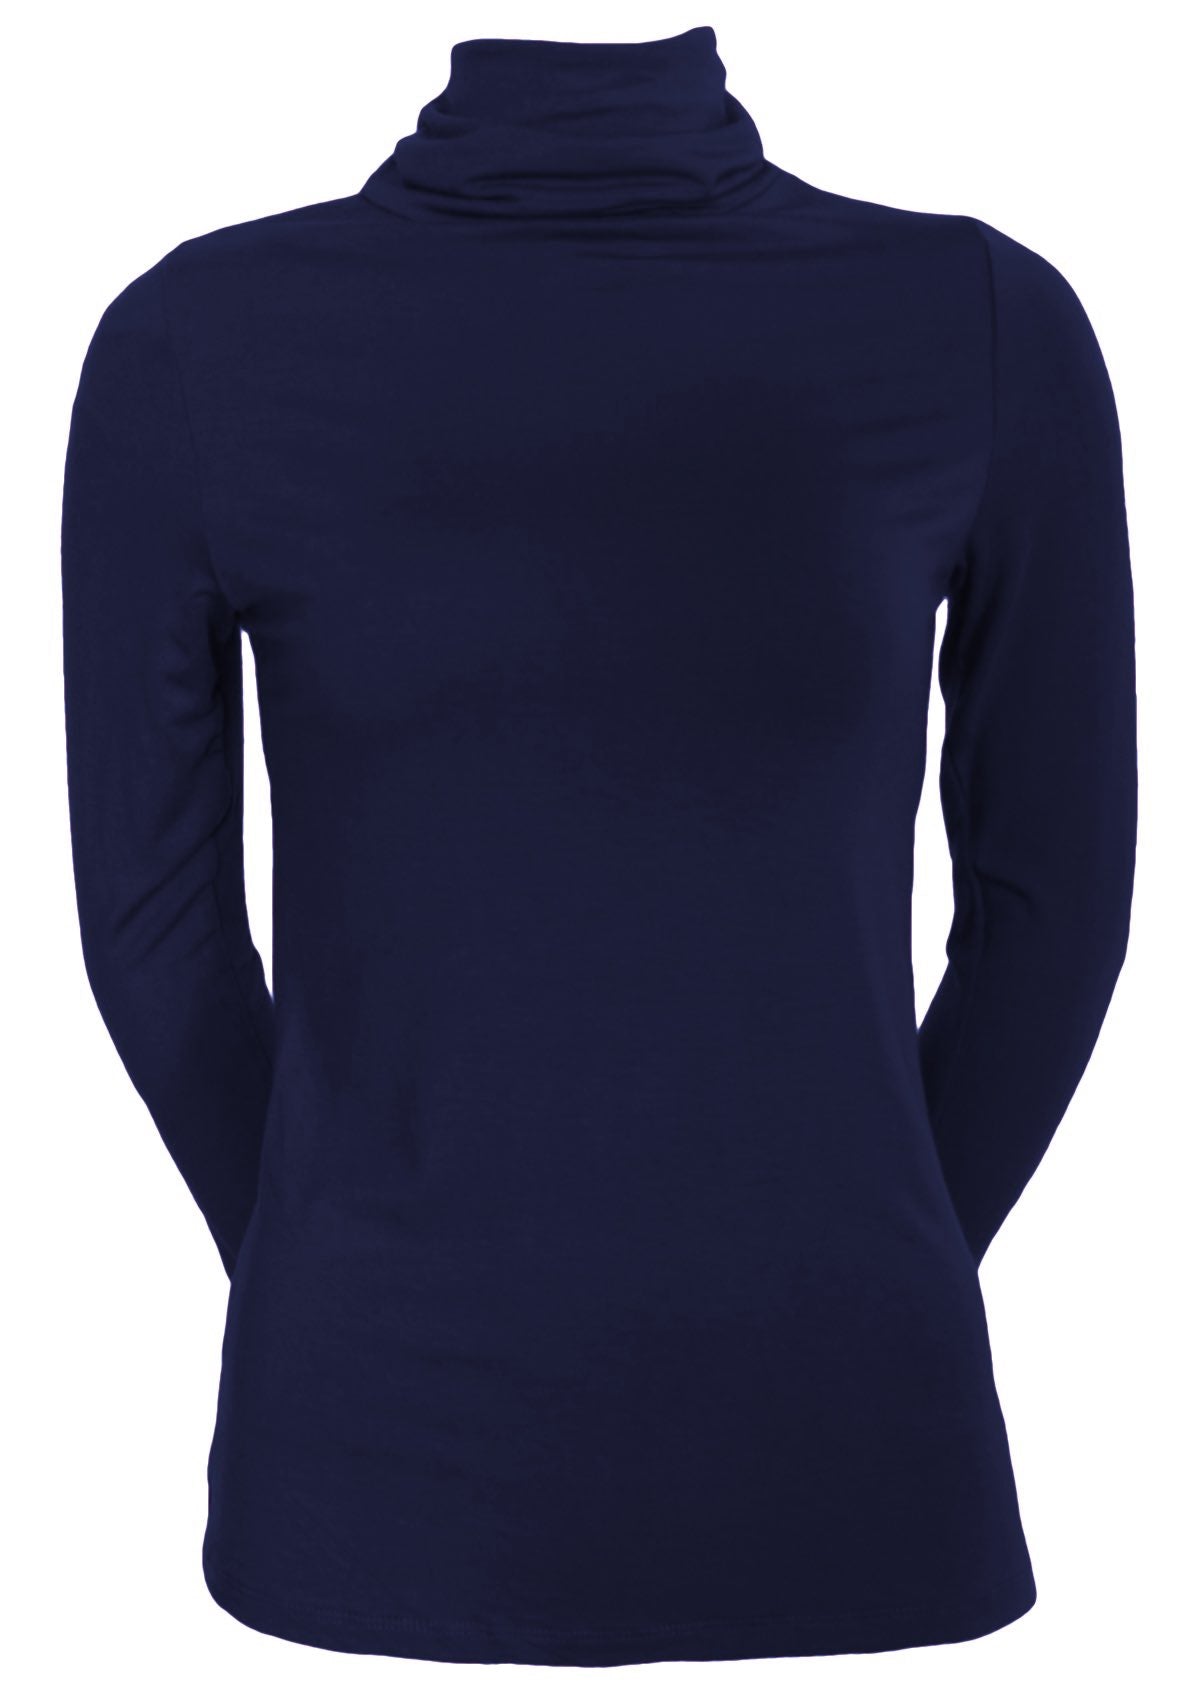 Front view of women's turtleneck navy blue fitted long sleeve soft stretch rayon top.